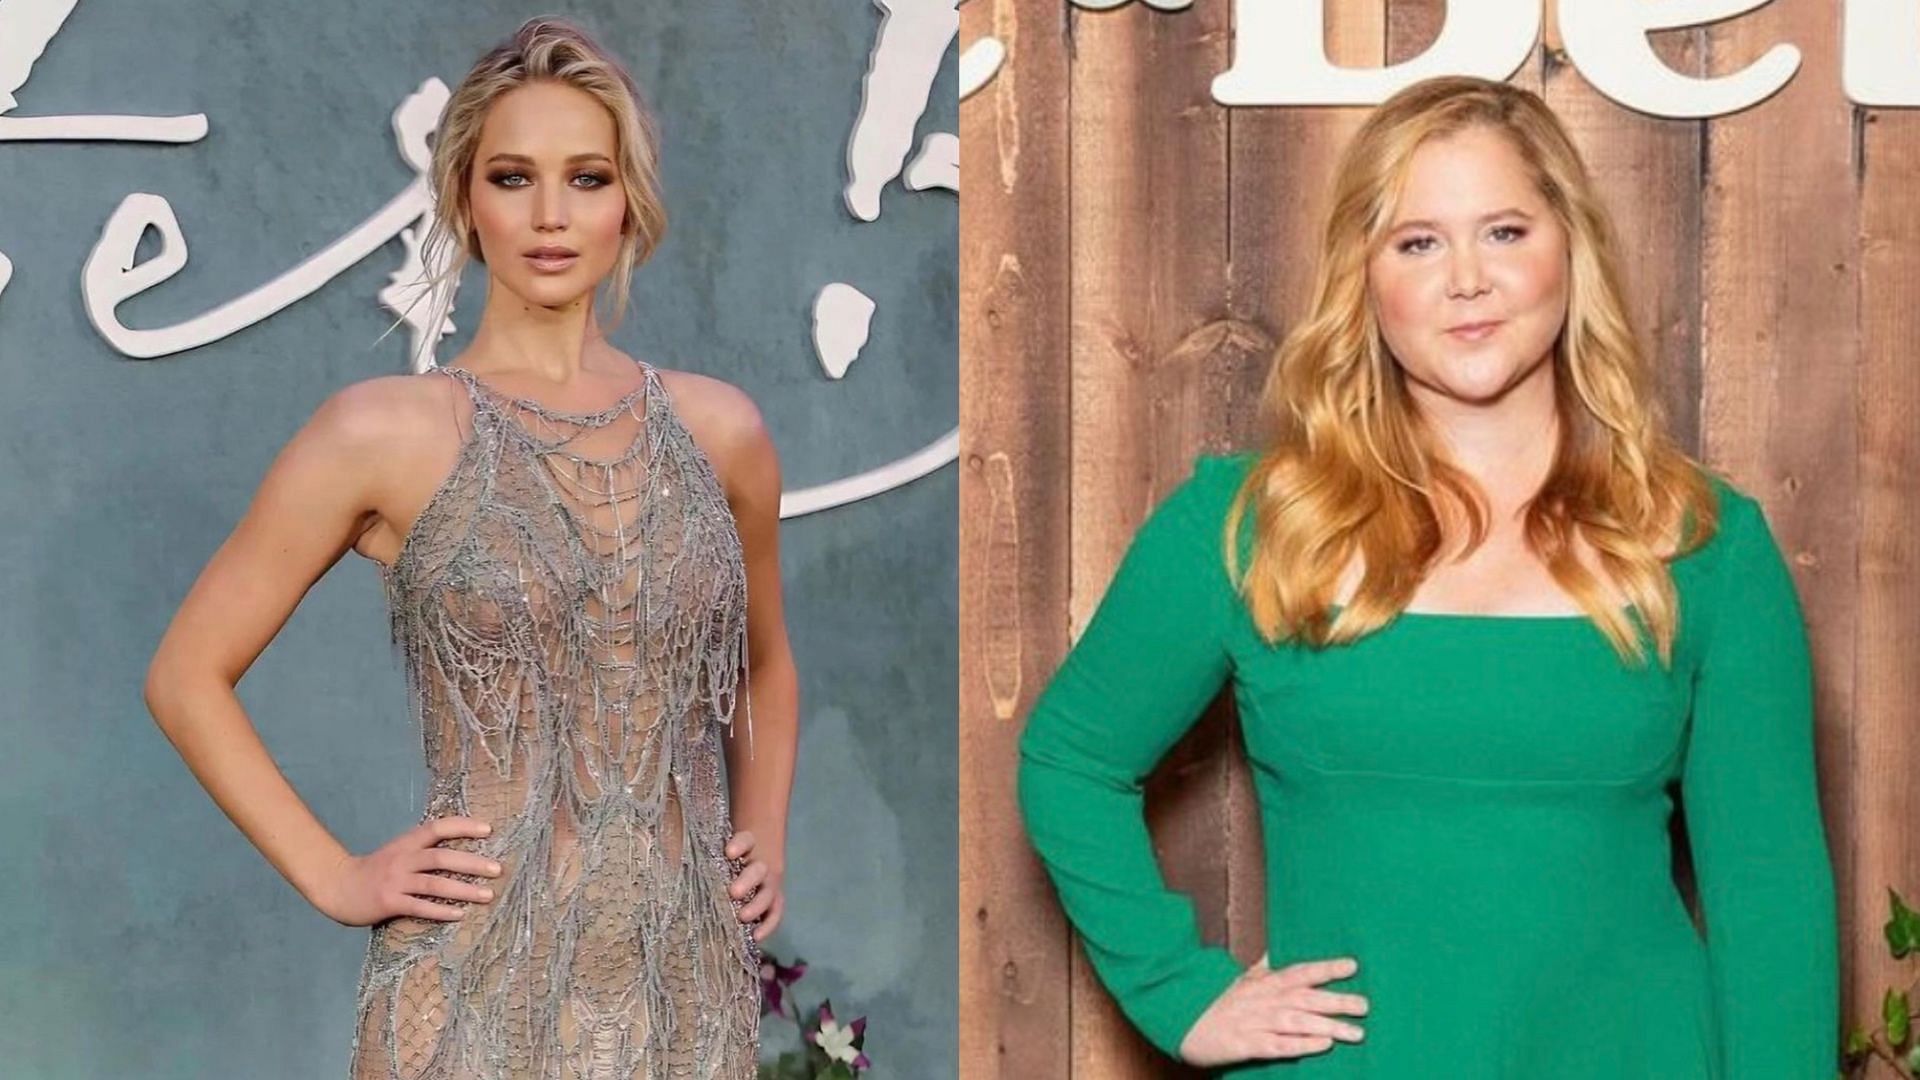 Jennifer Lawrence and Amy Schumer talk about collaboration. (Images via Instagram/@1jnnf &amp; @amyschumer)